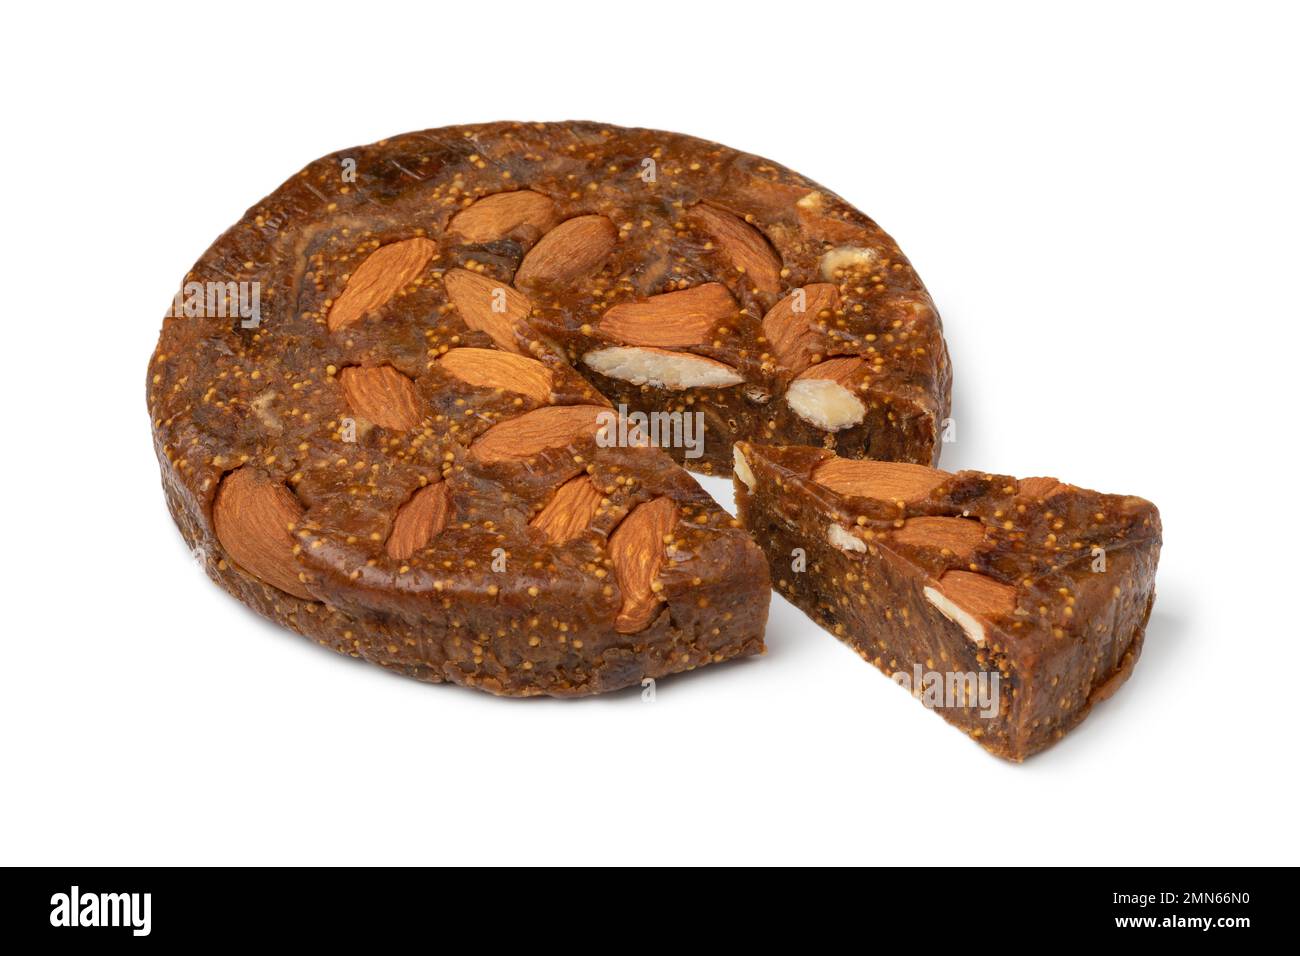 Single round fig bread with almonds and a piece close up isolated on white background Stock Photo